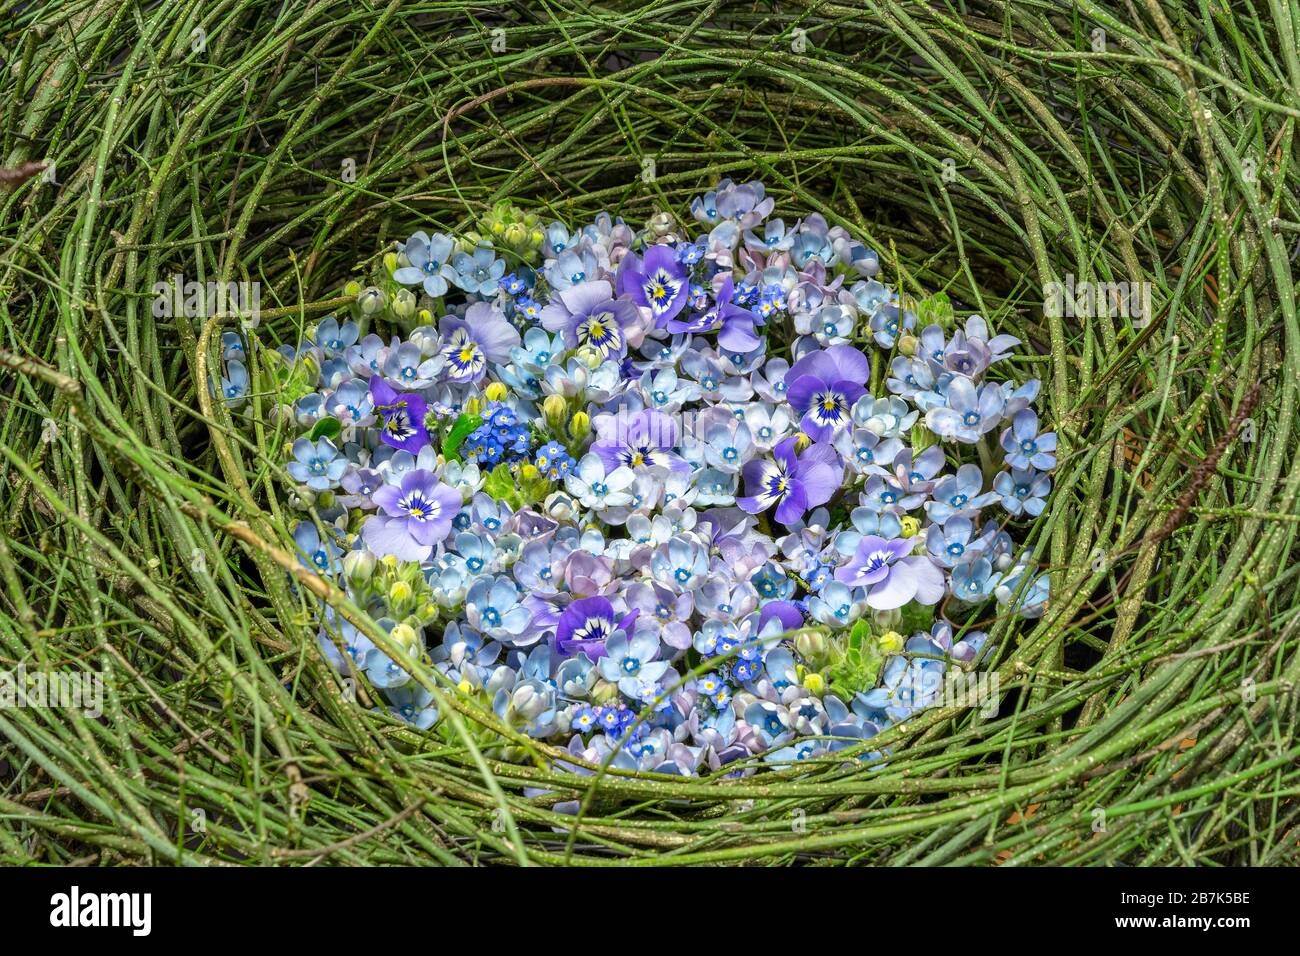 Beautiful springy oval arrangement of blue and purple flowers with pansy, forget-me-not and yellow blossom buds among the twisted stems of green plant Stock Photo